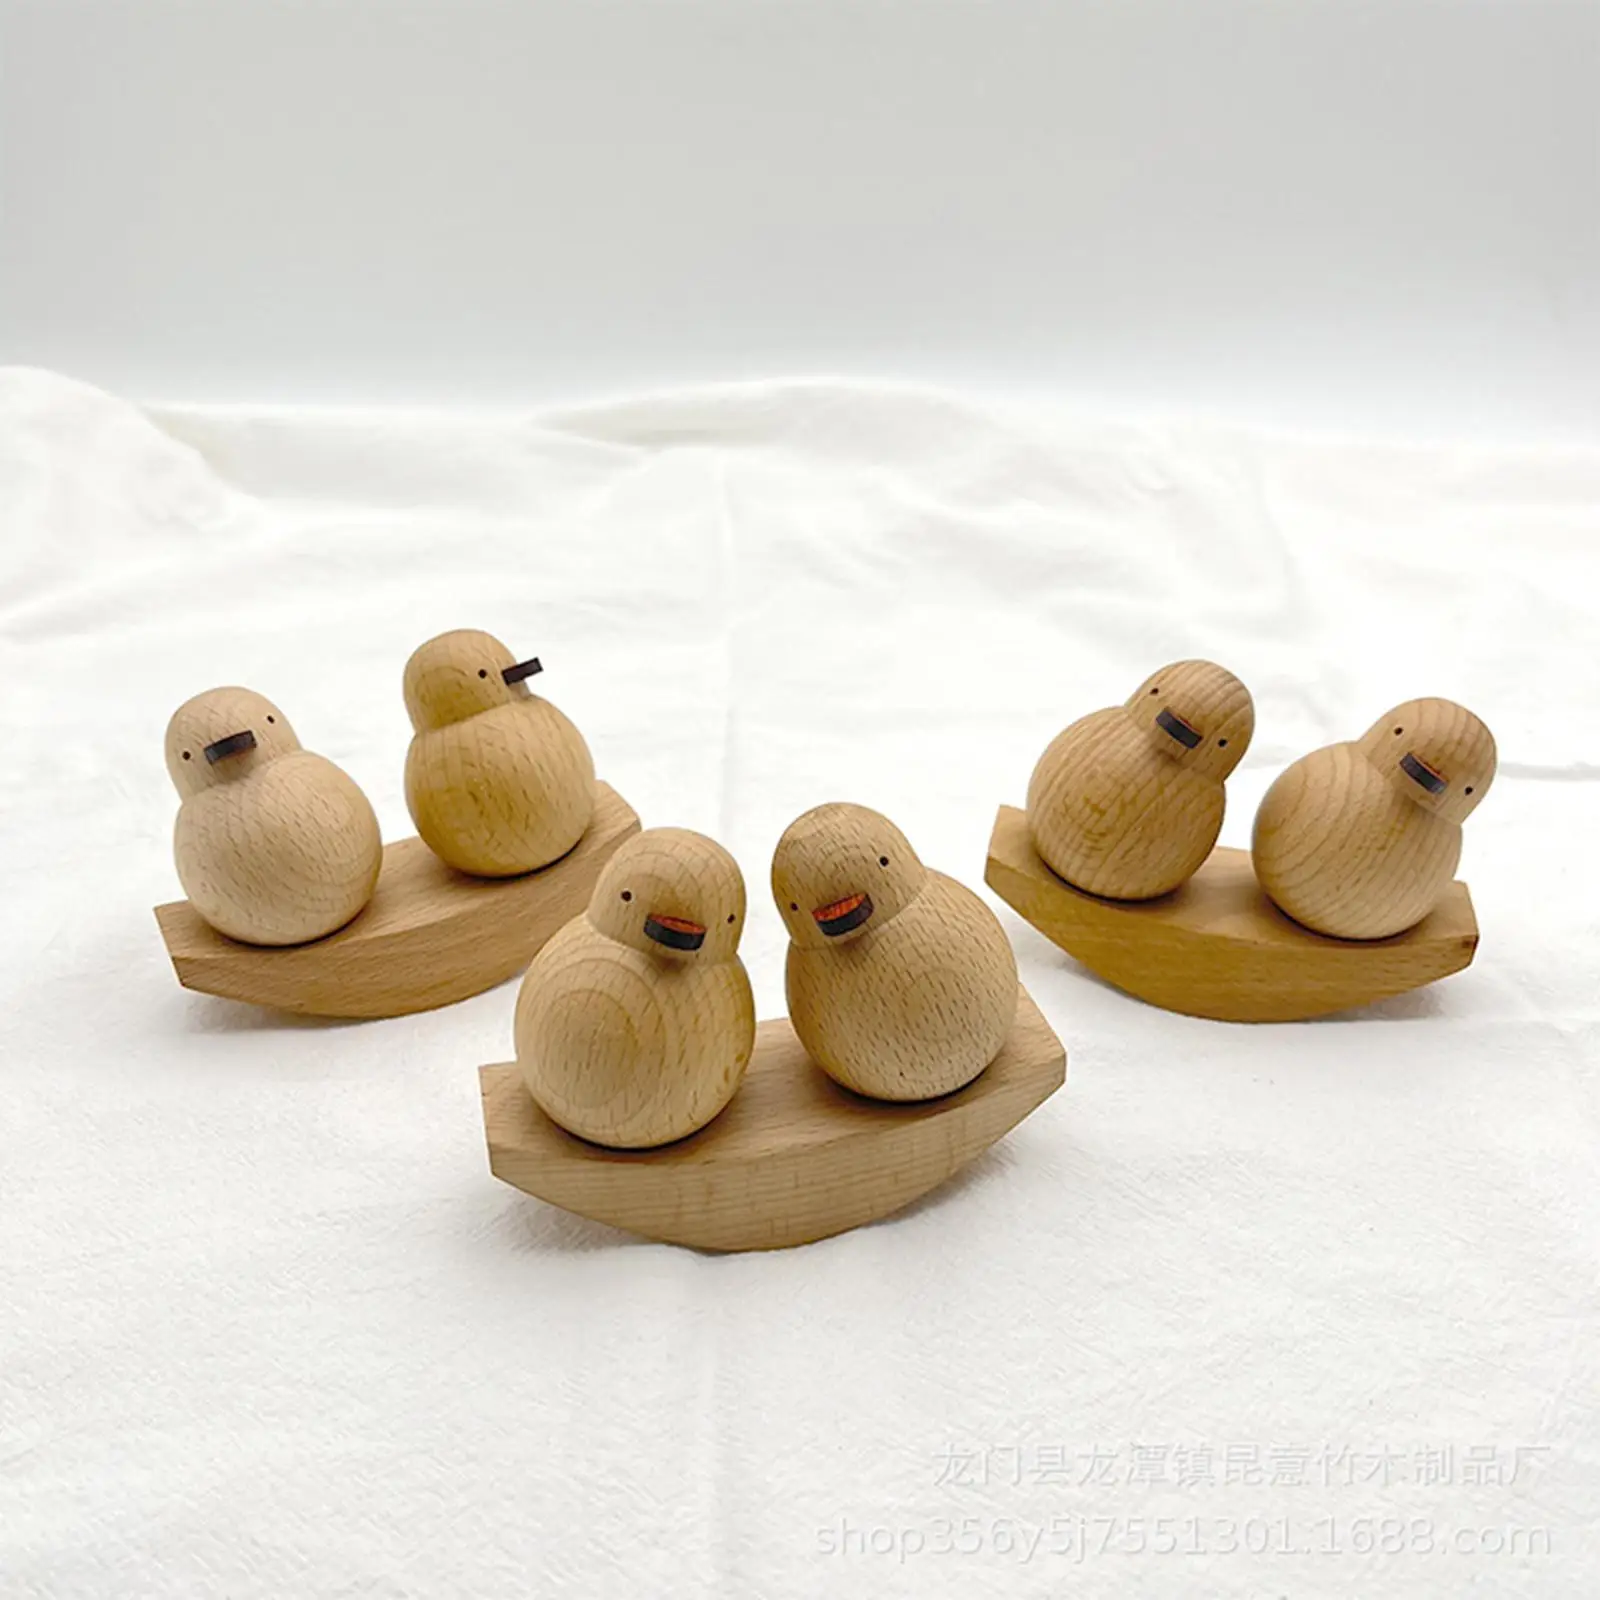 Carved Duck Sculptures Cute Collectible Decoration Gifts Wood Statue Ornament for Dining Room Window Birthday Weddings Wedding